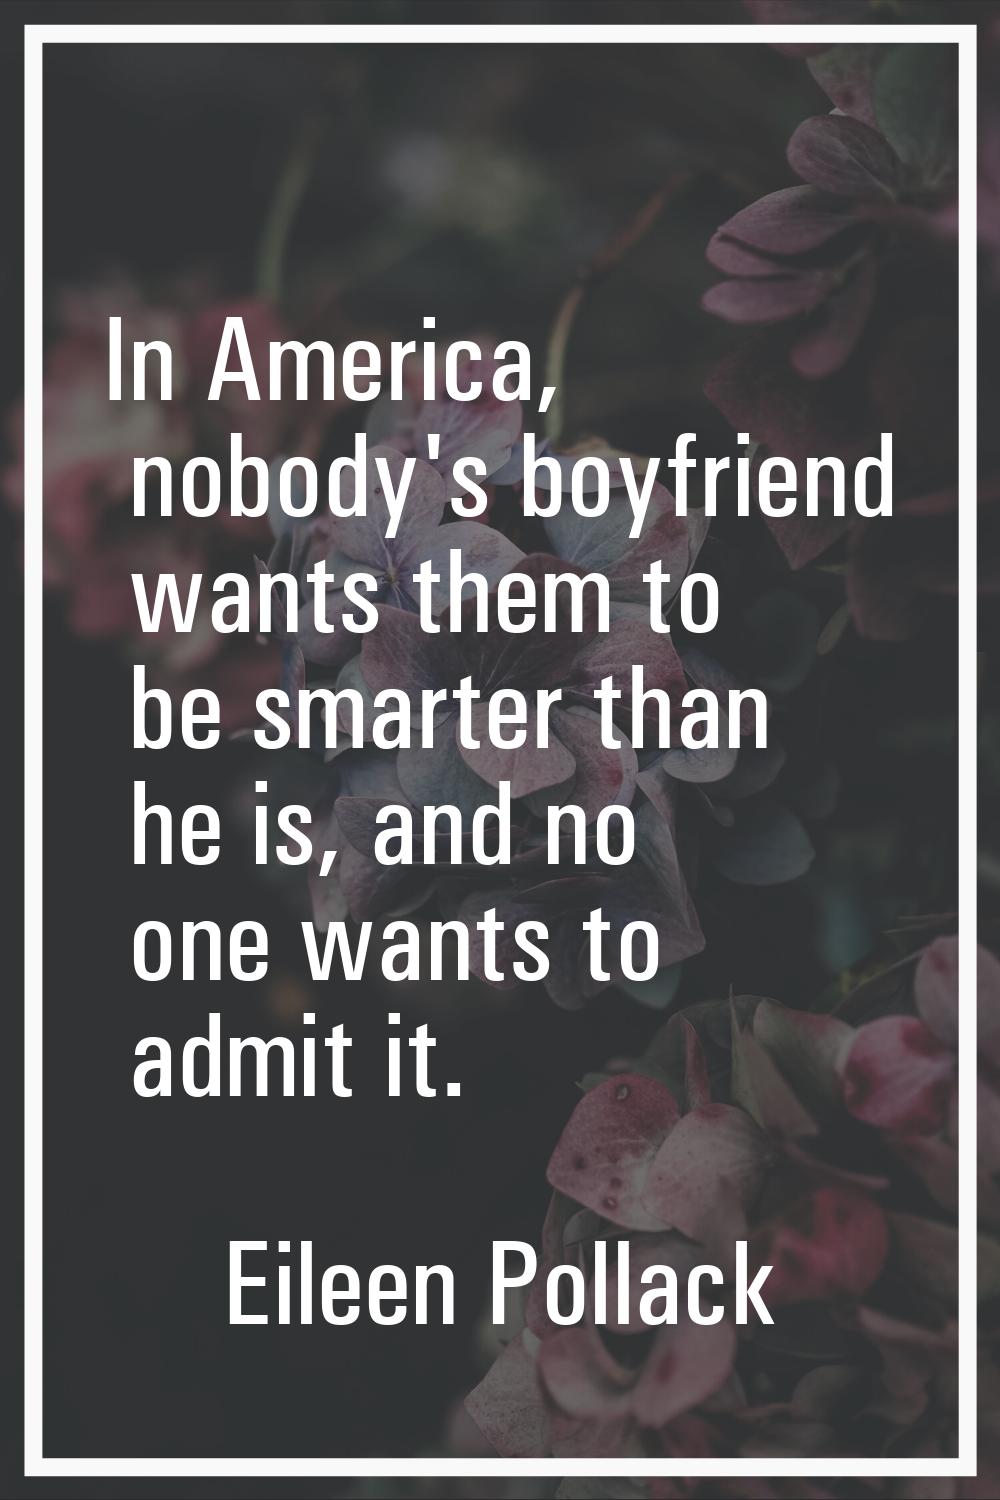 In America, nobody's boyfriend wants them to be smarter than he is, and no one wants to admit it.